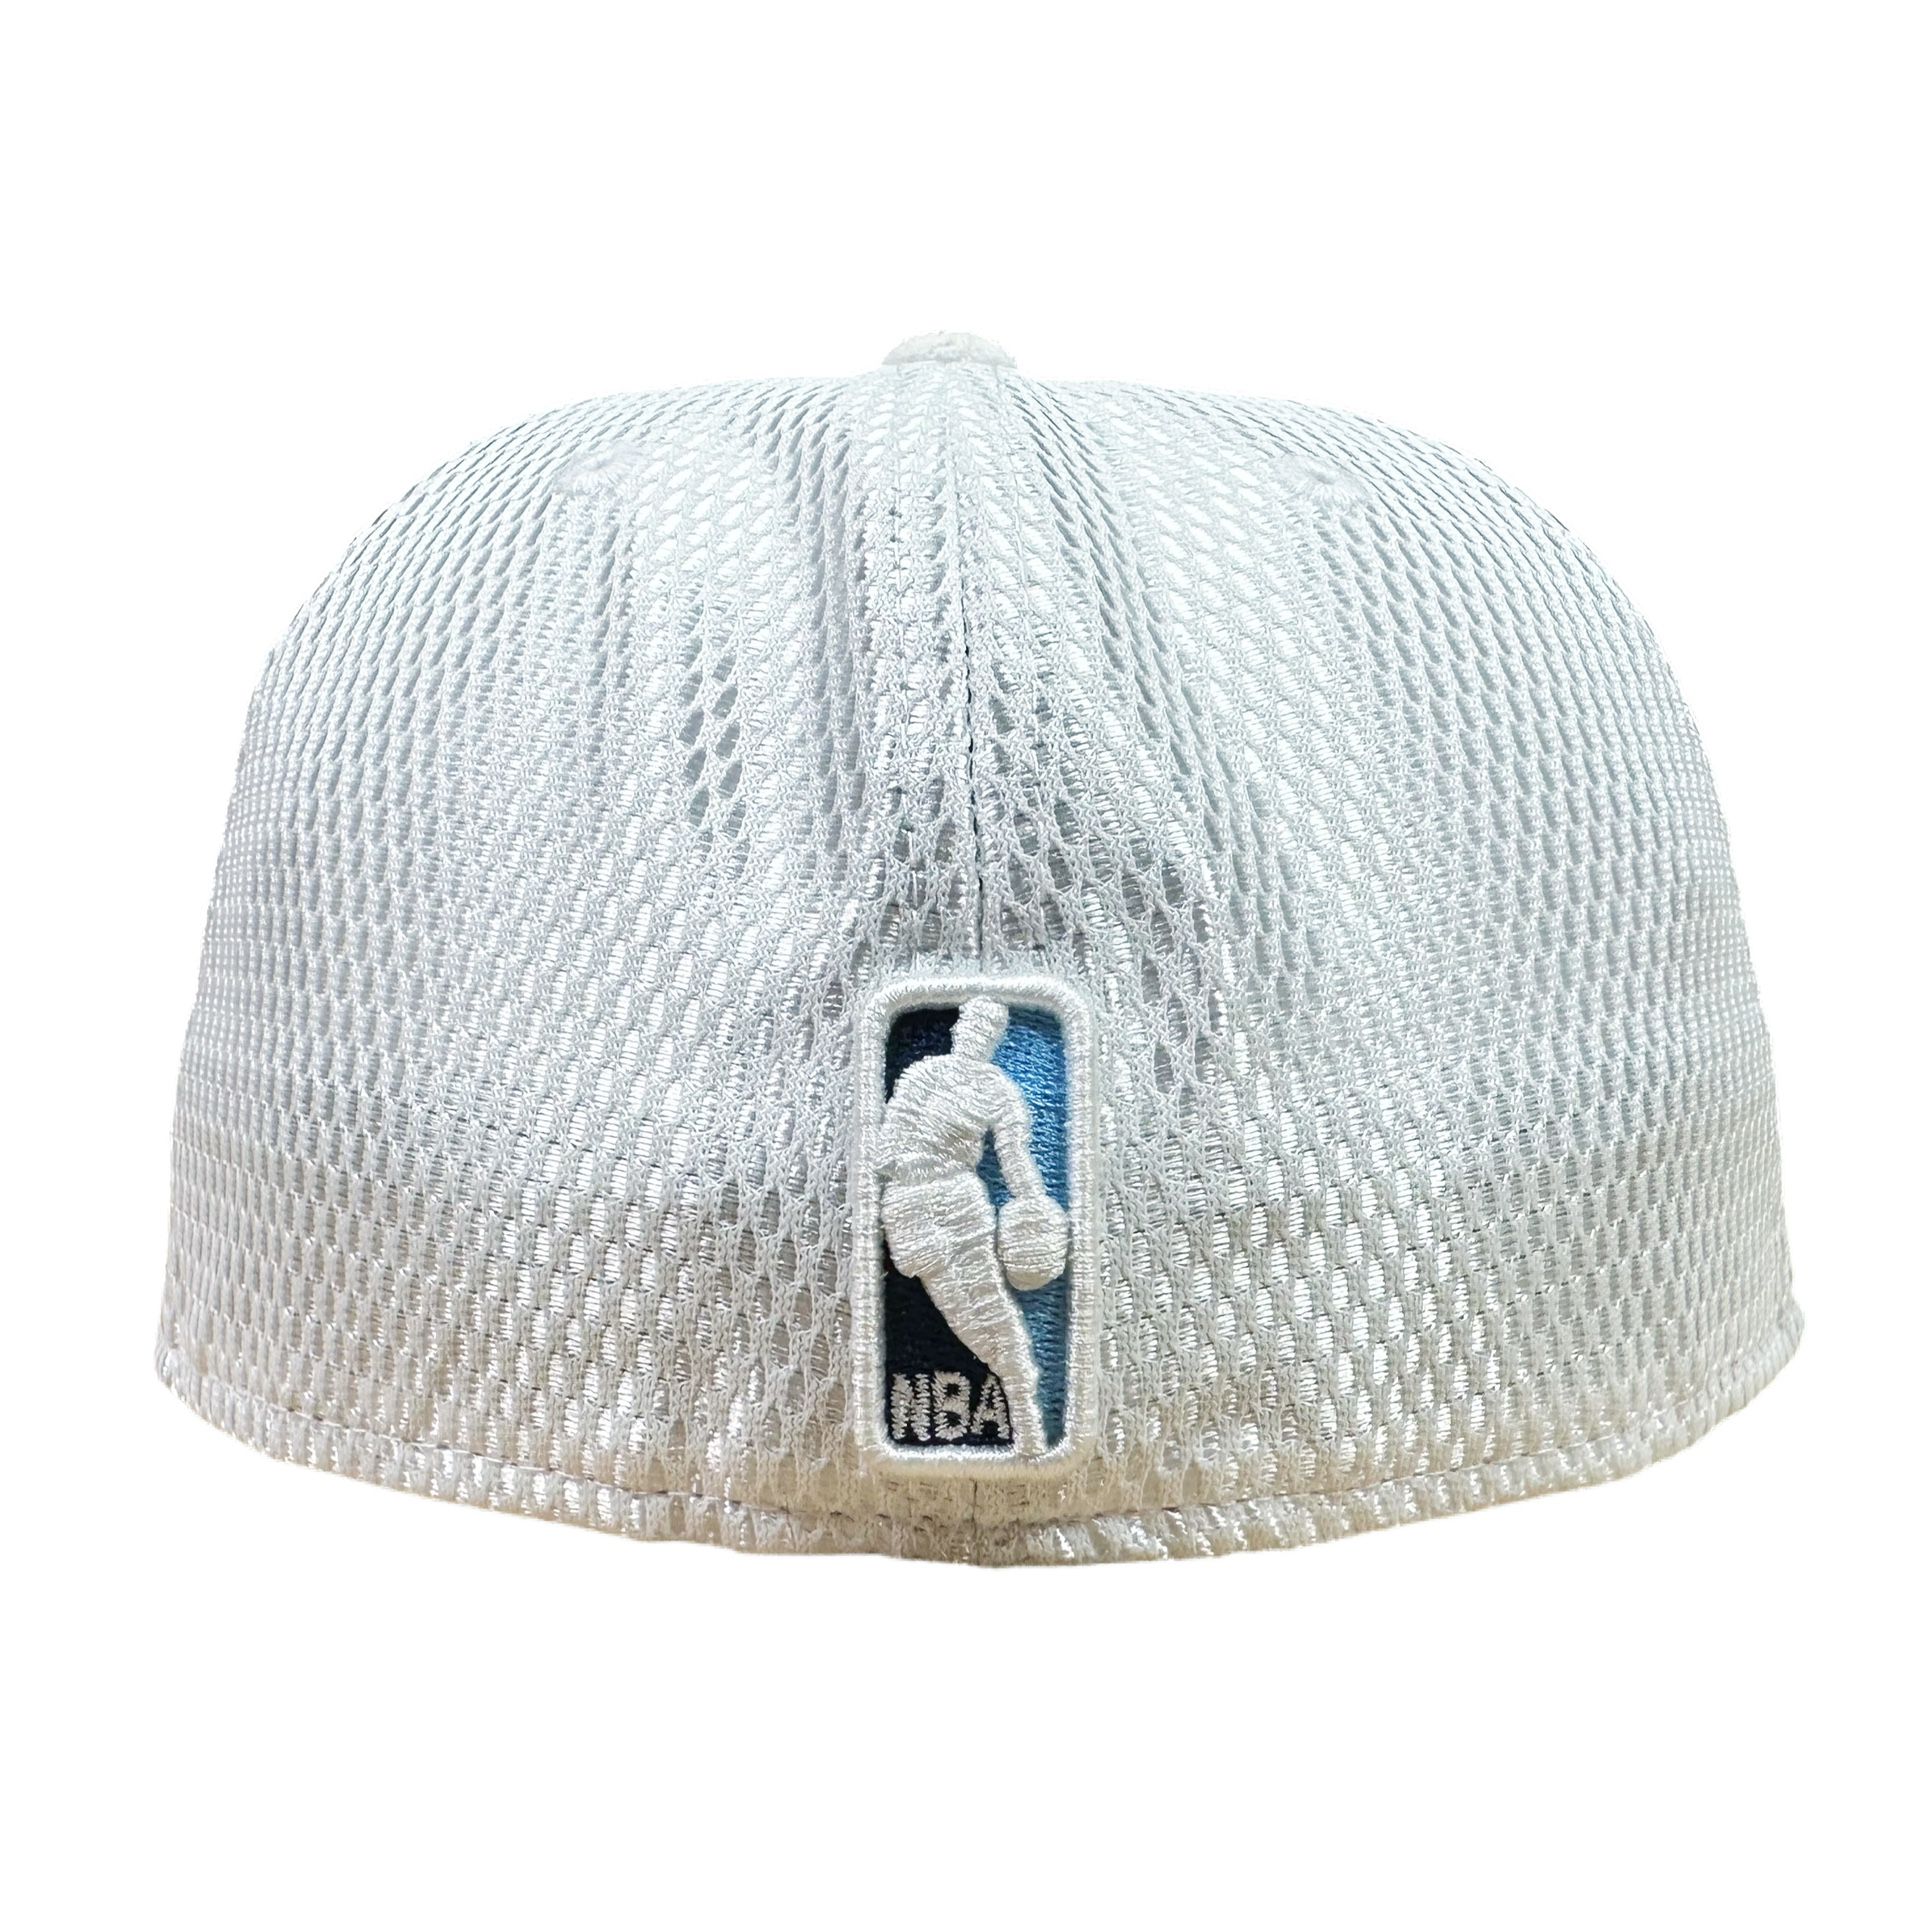 New Era 59Fifty NBA Denver Nuggets Fitted Cap 